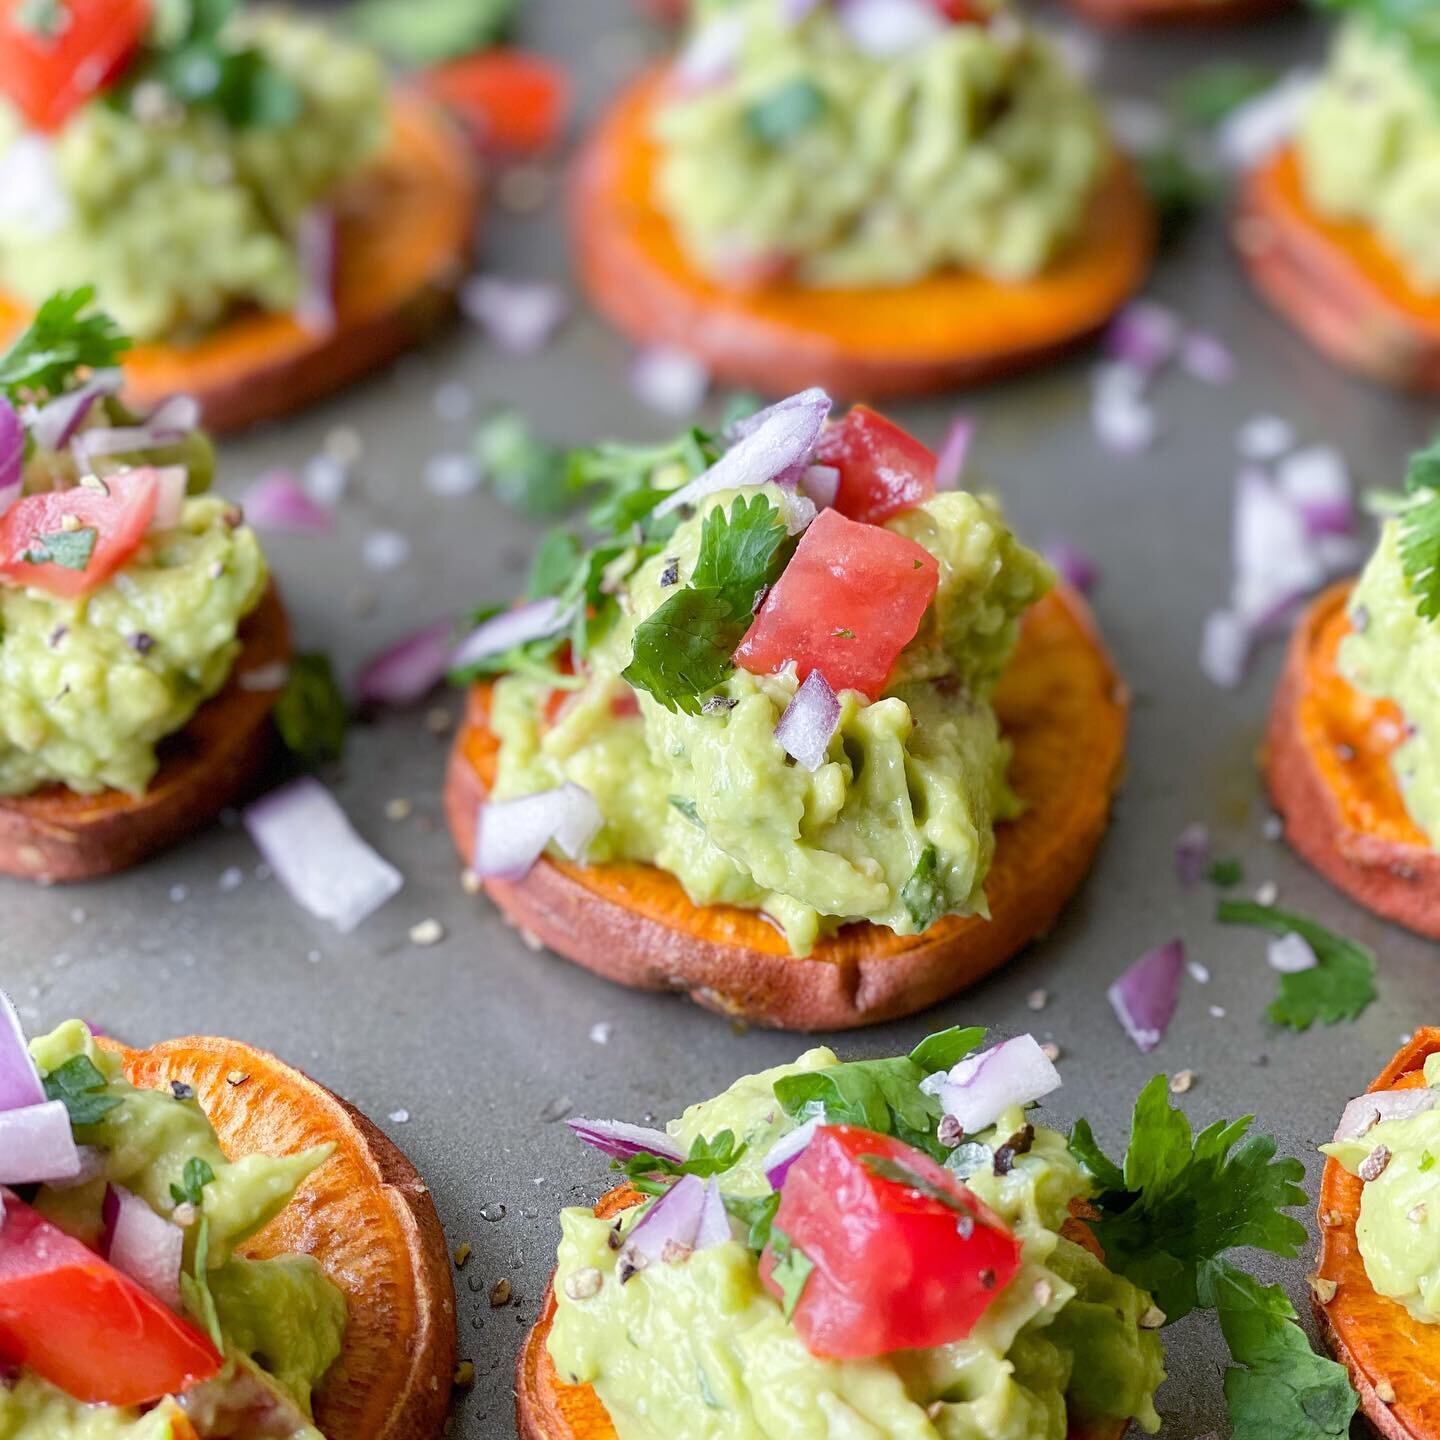 GUACAMOLE SWEET POTATO CROSTINI&hellip;one of my fave apps or snacks! 🥑🍠✨ 

First off, this guacamole is the bomb!! It&rsquo;s creamy, tangy, spicy and has a zesty kick to it. I love adding extra bits like mango or even black beans to it. The sweet